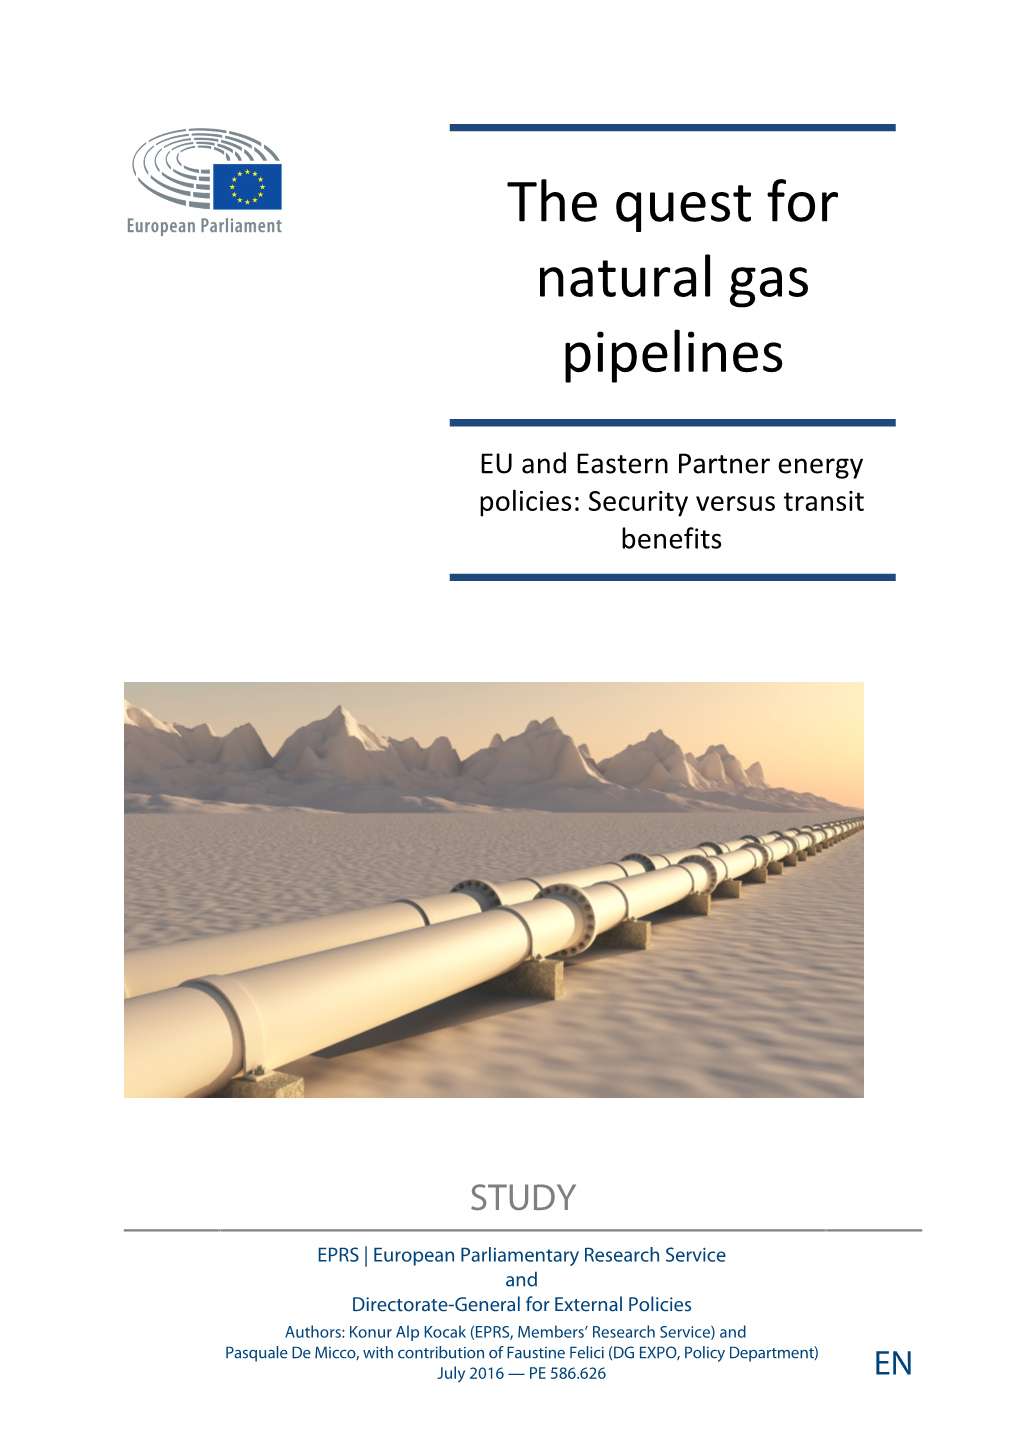 The Quest for Natural Gas Pipelines